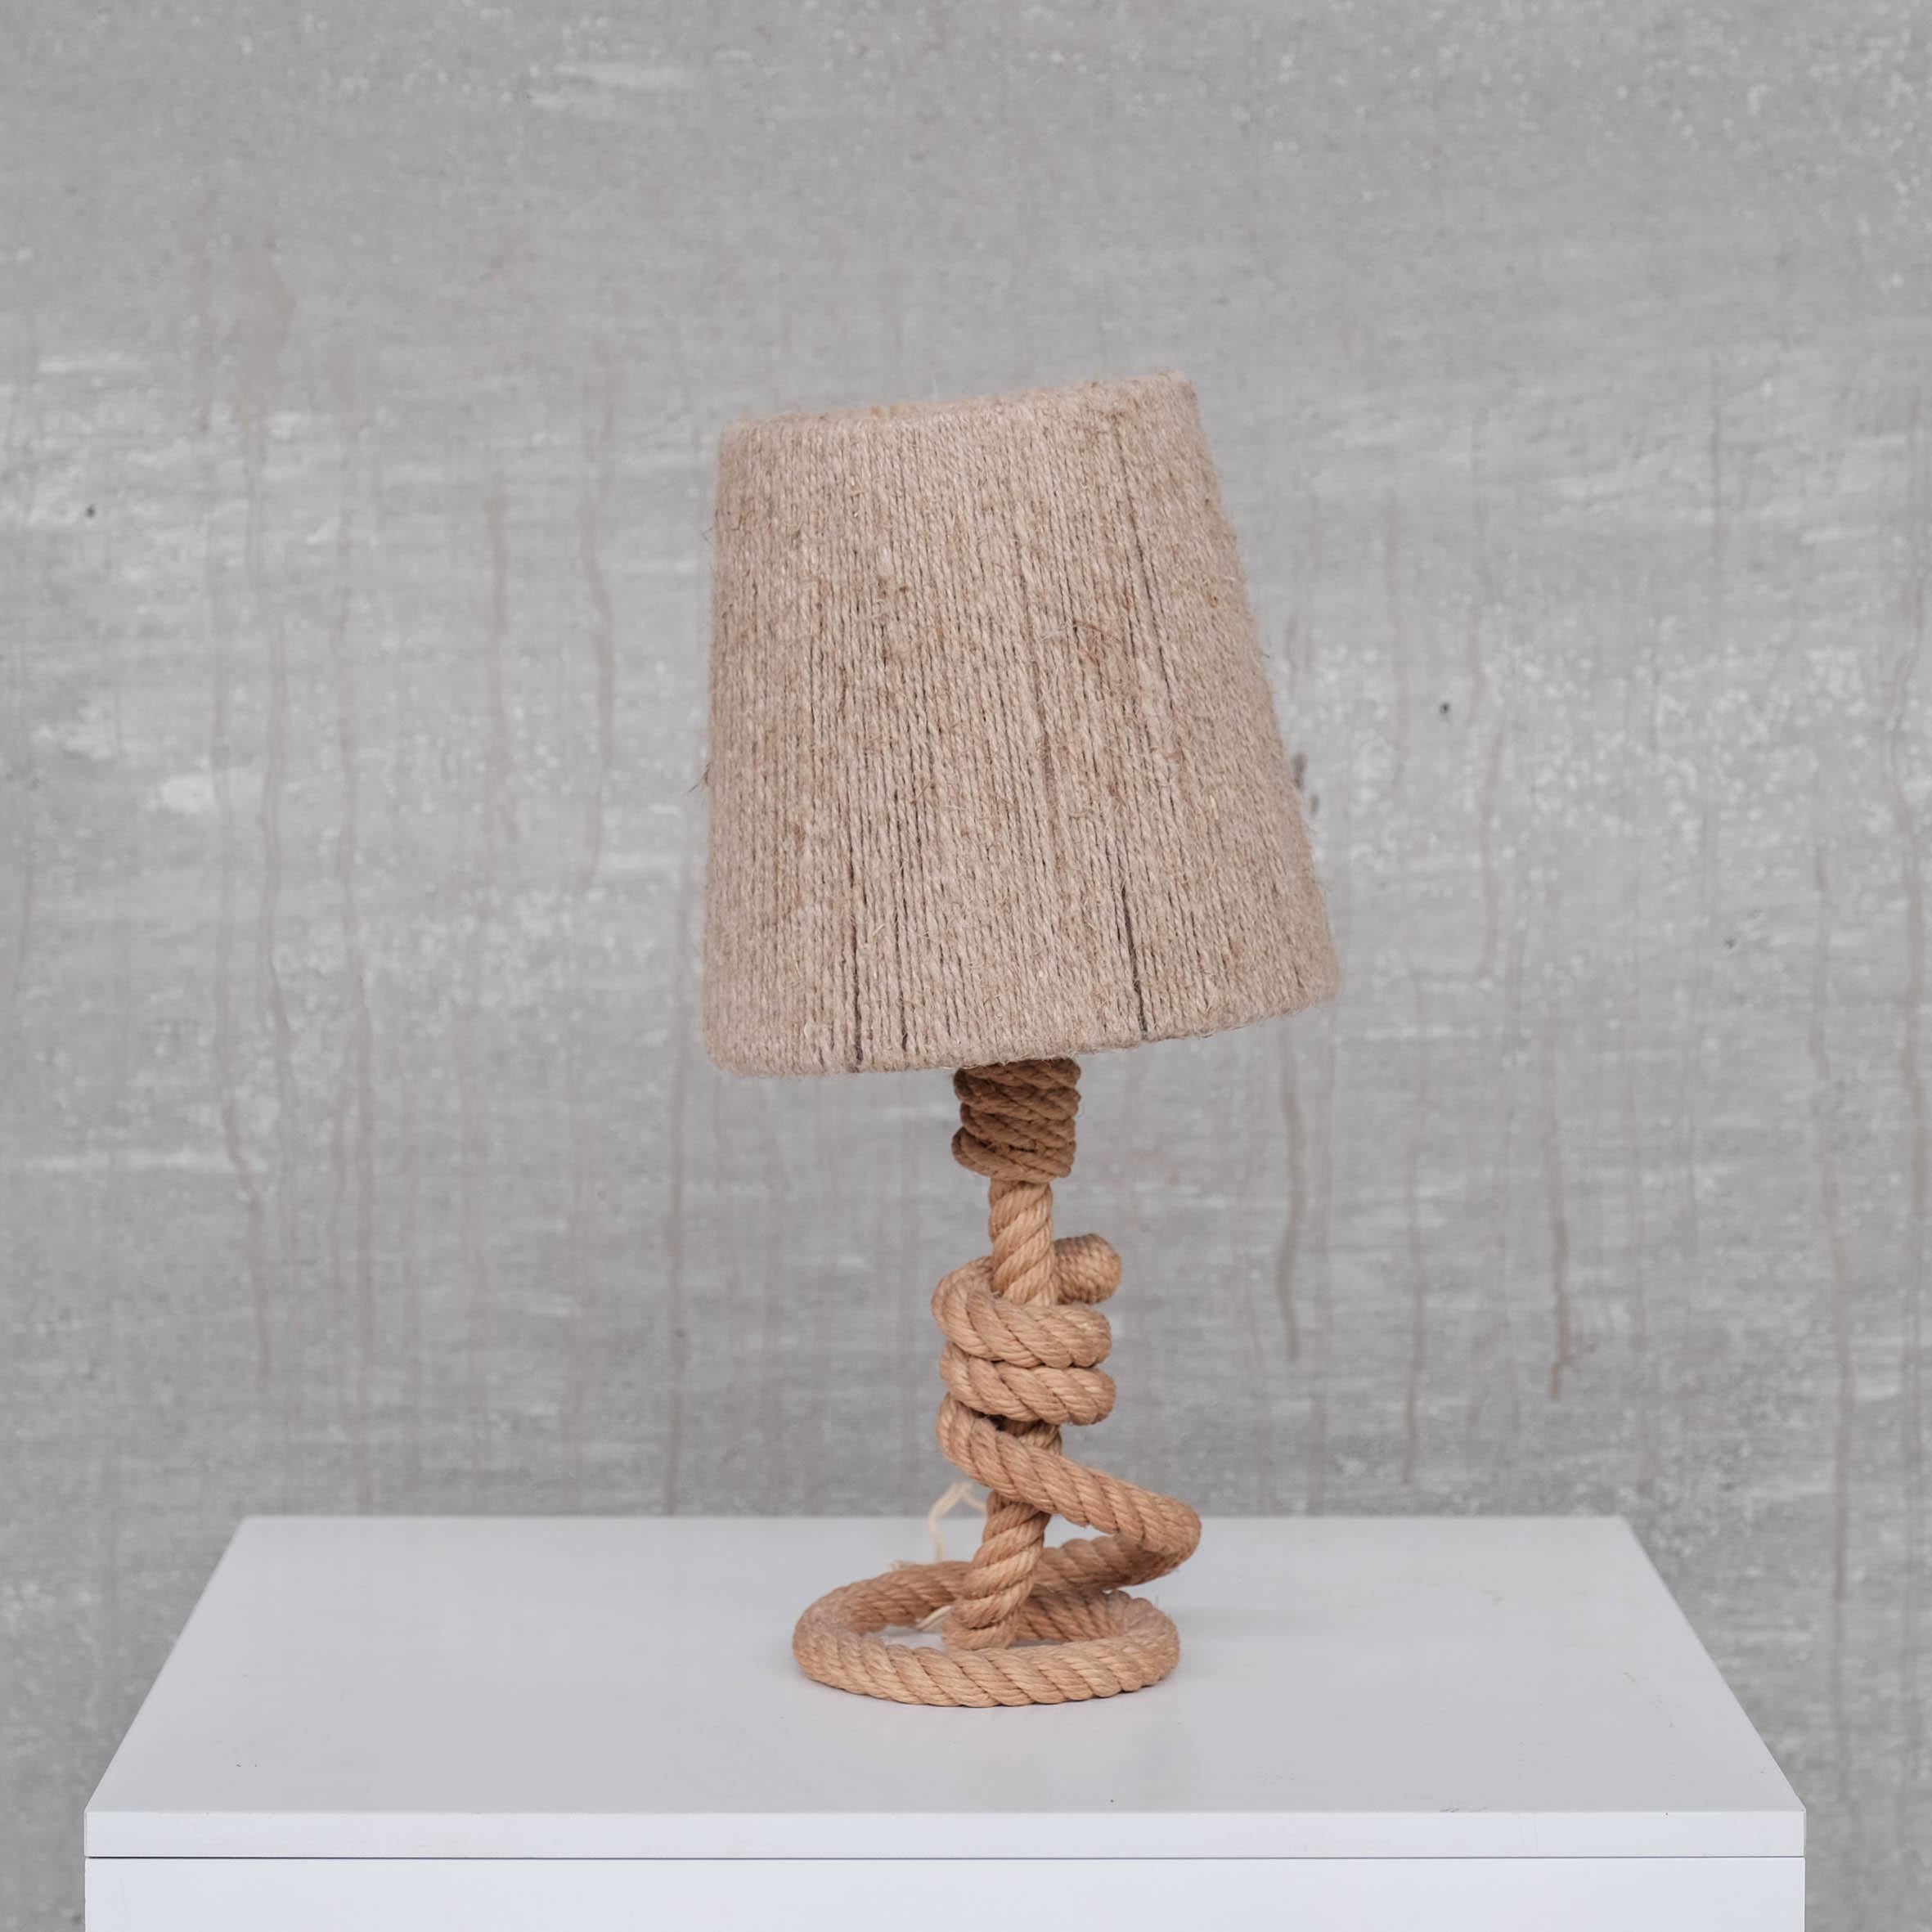 A petite rope table lamp. 

France, c1960s. 

Attributed to Audoux-Minet. 

With matching rope cord shade. 

Since re-wired and PAT tested. 

Good vintage condition. Some scuffs commensurate with age. 

Location: Belgium Gallery. 

Dimensions: 31 H